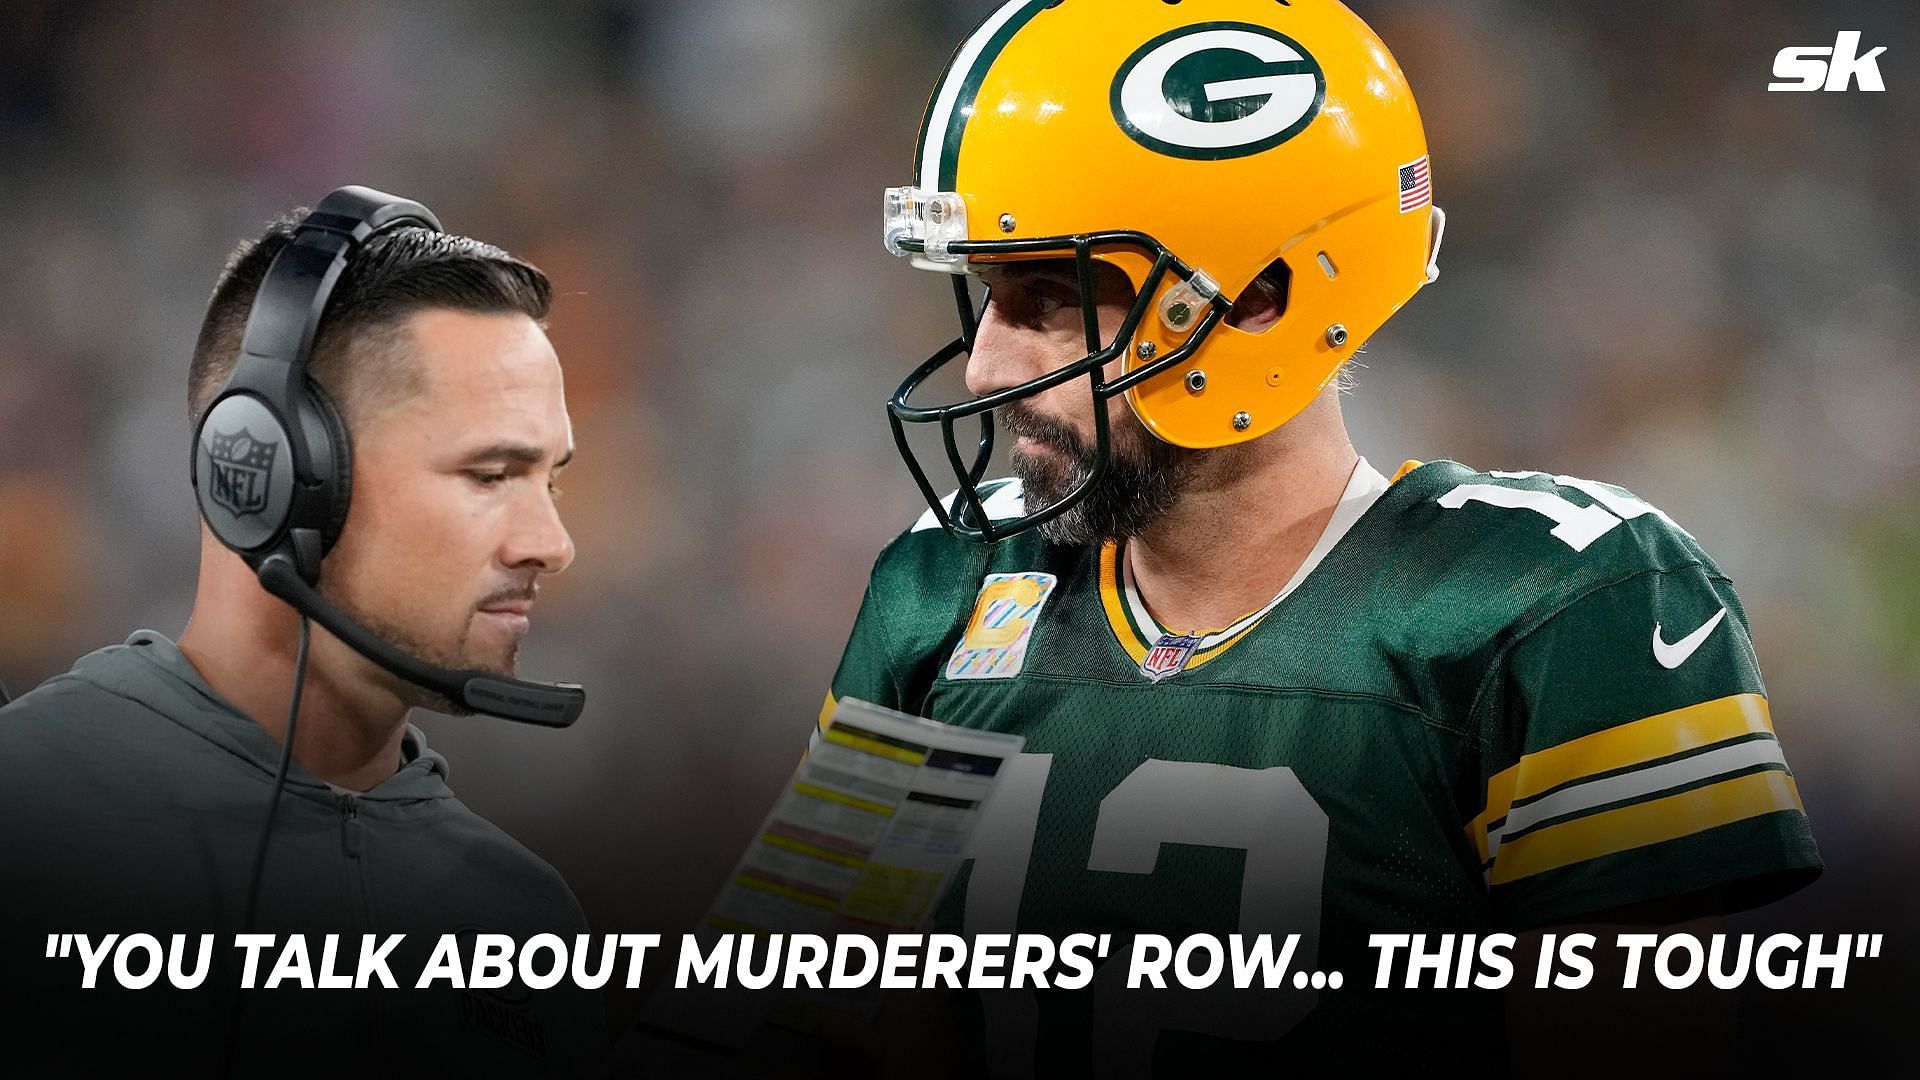 Tough times lie ahead for the Green Bay Packers and Aaron Rodgers  